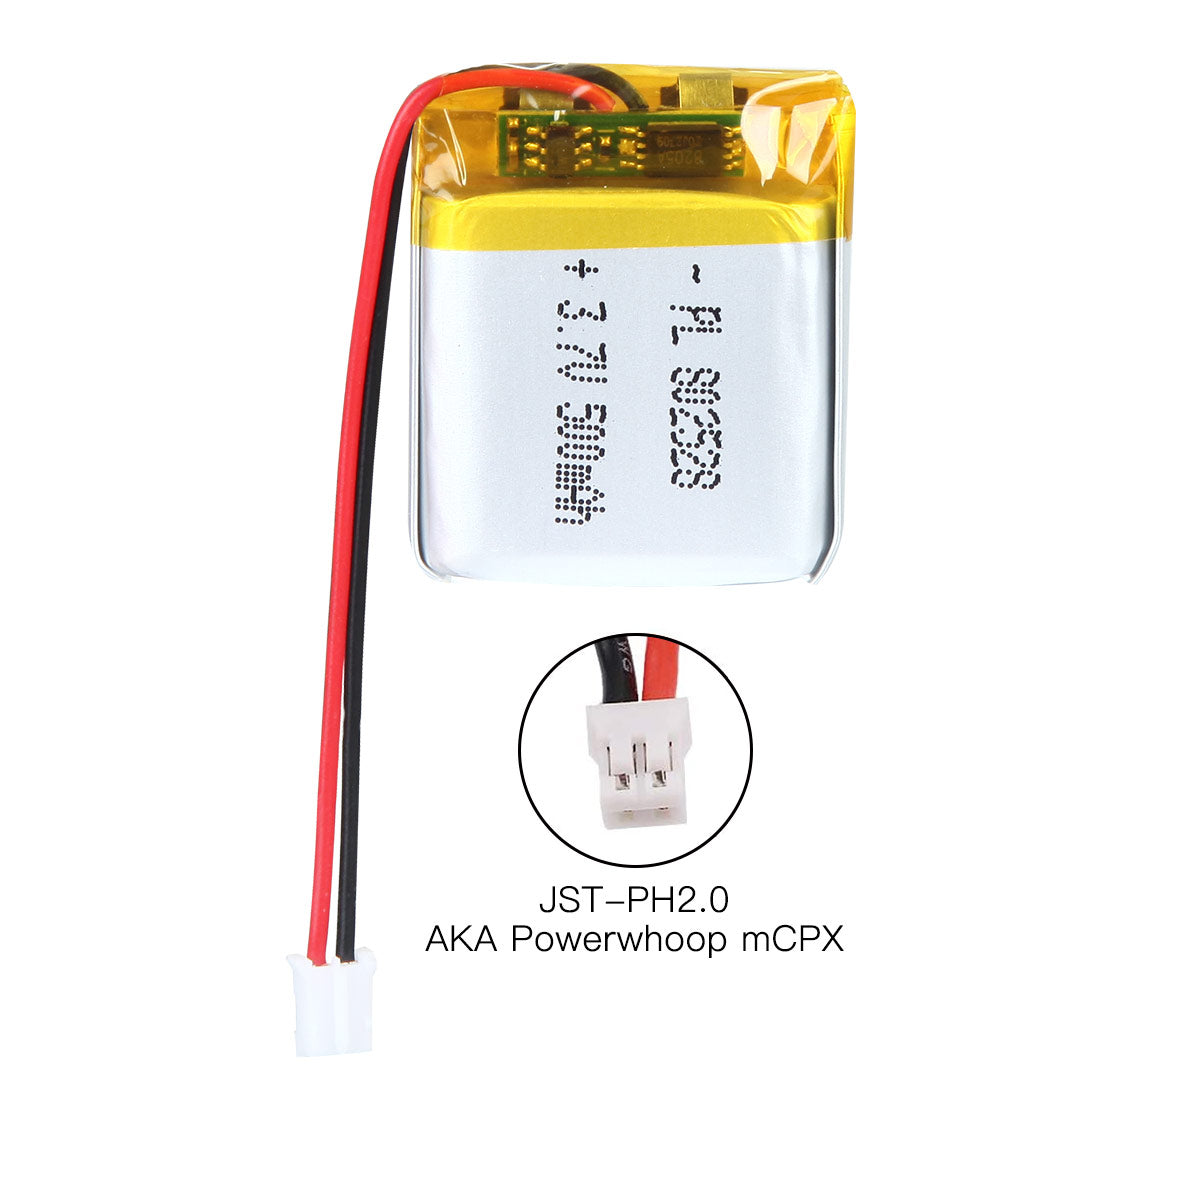 YDL 3.7V 480mAh 802528 Rechargeable Lipo Battery with JST Connector - YDL Battery